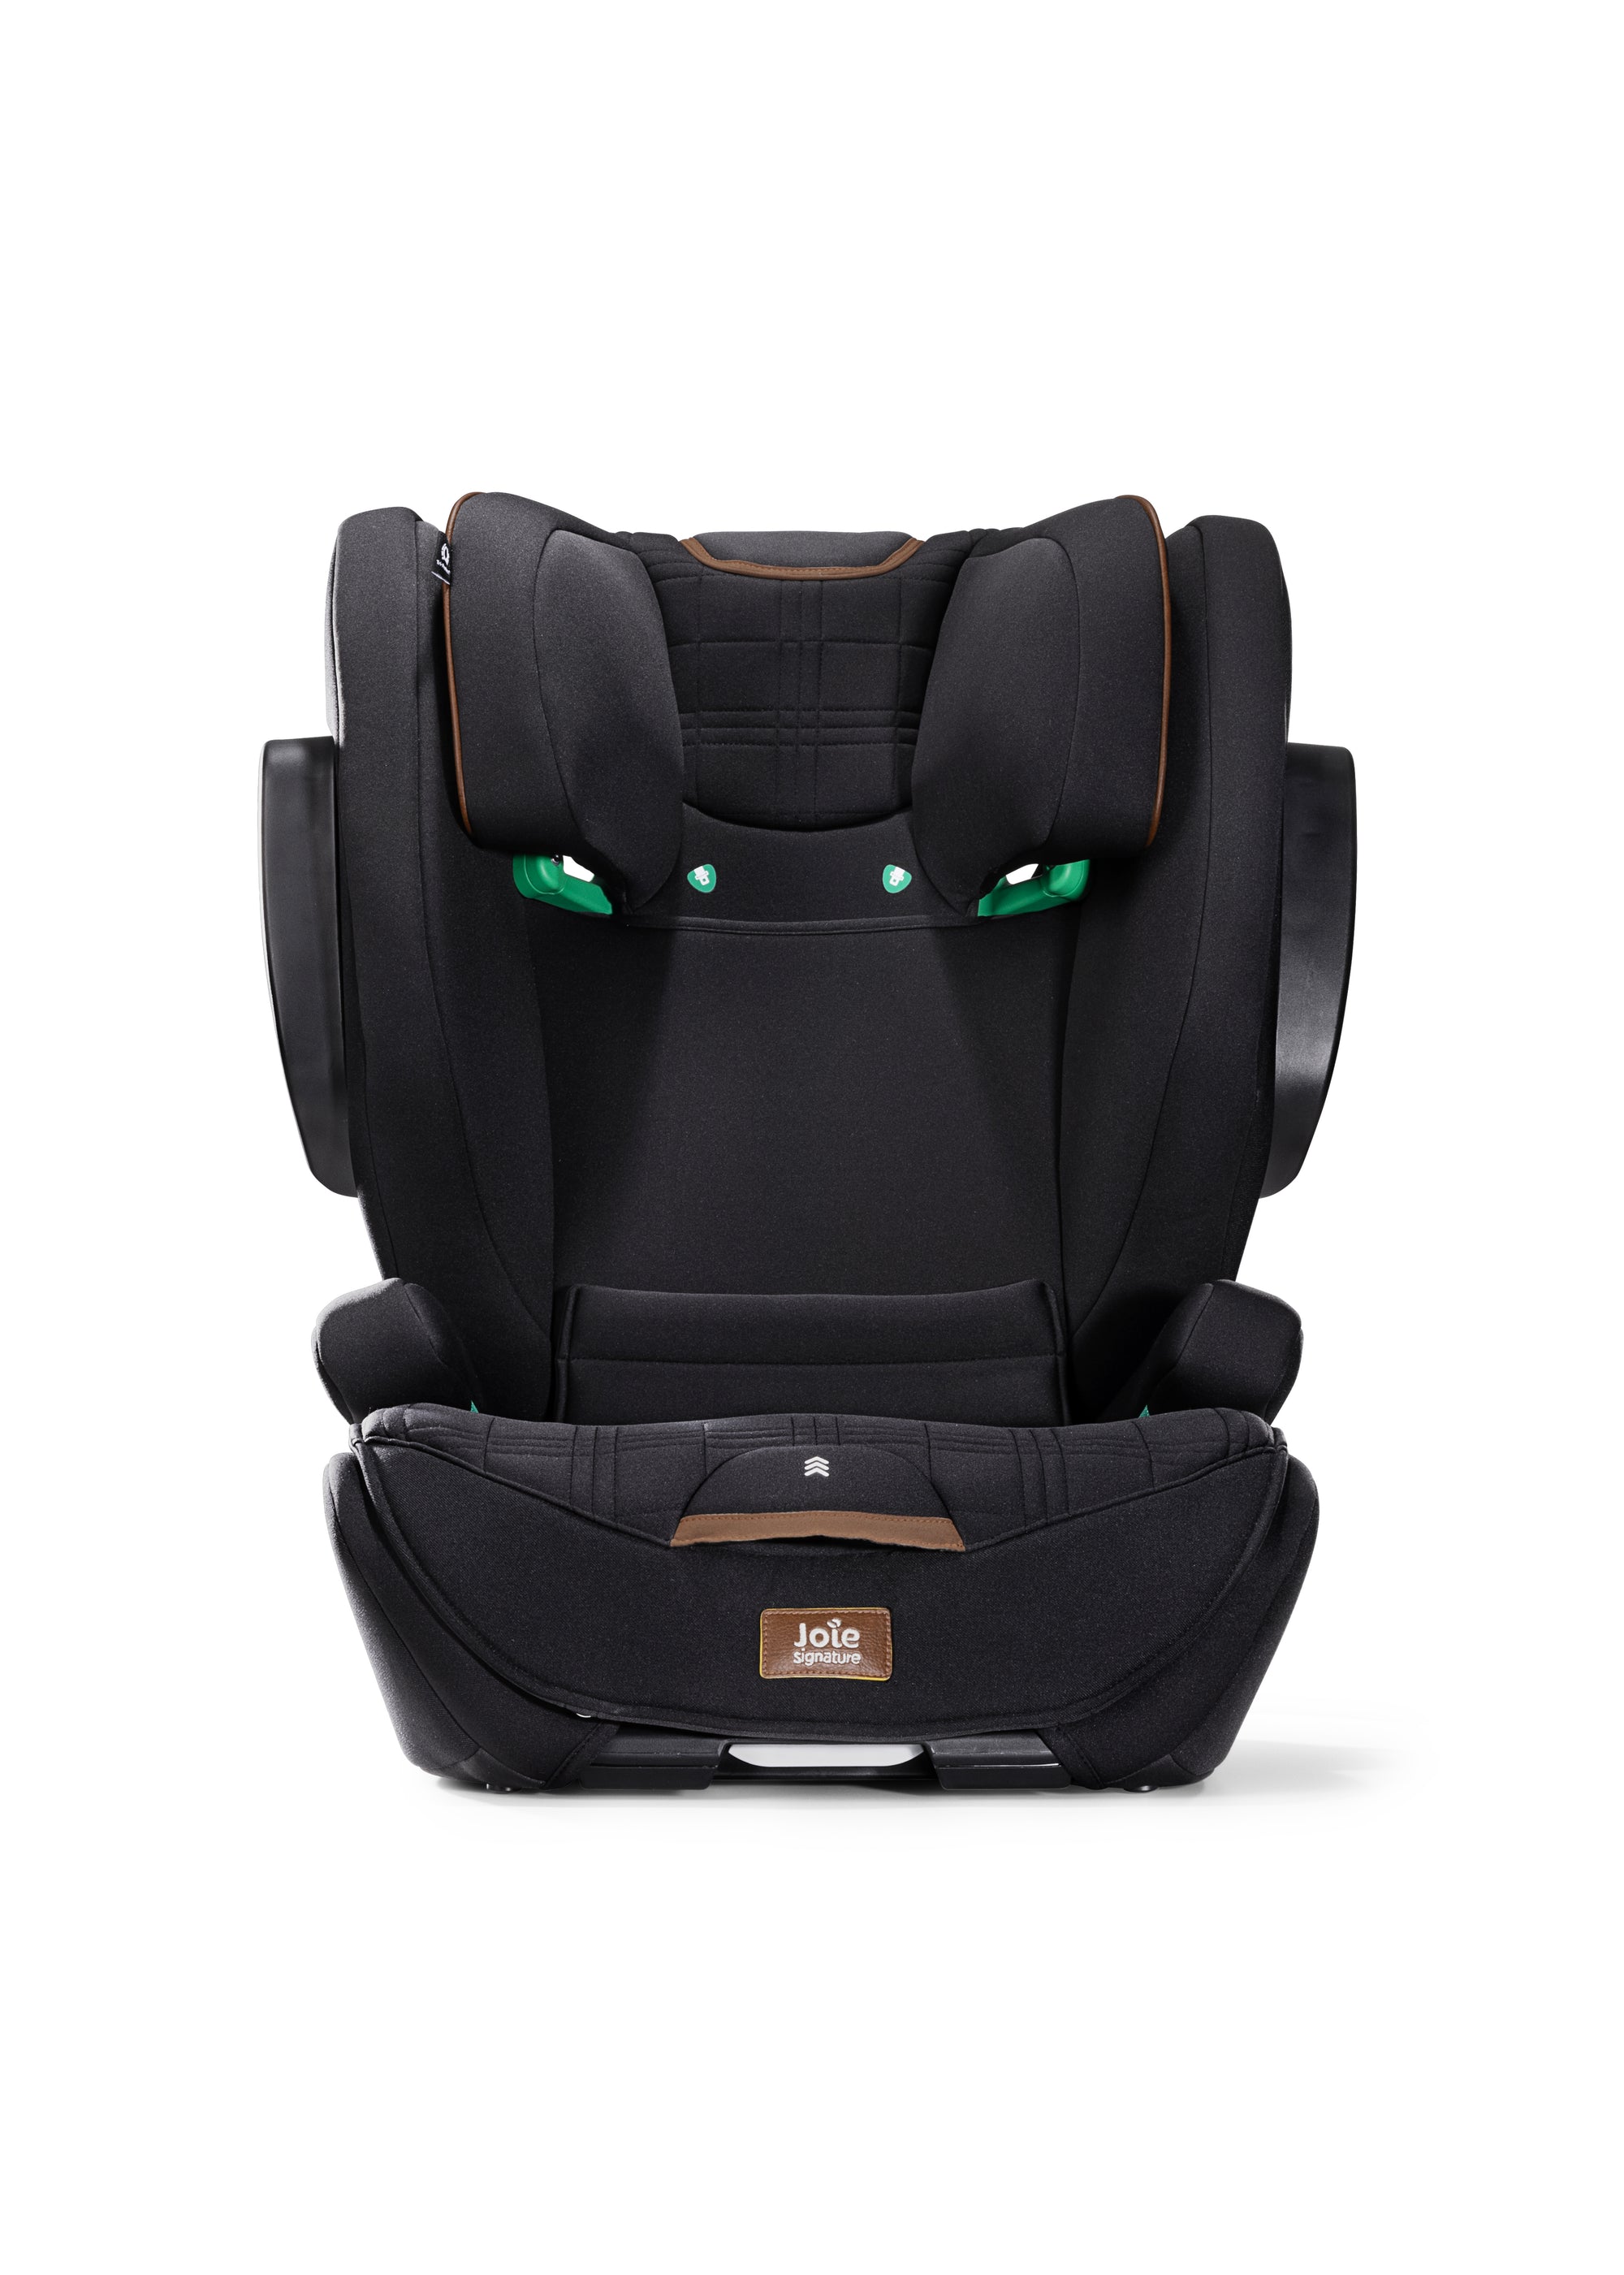 Joie Signature Car seat i-Traver Eclipse 9 to 36 Kg